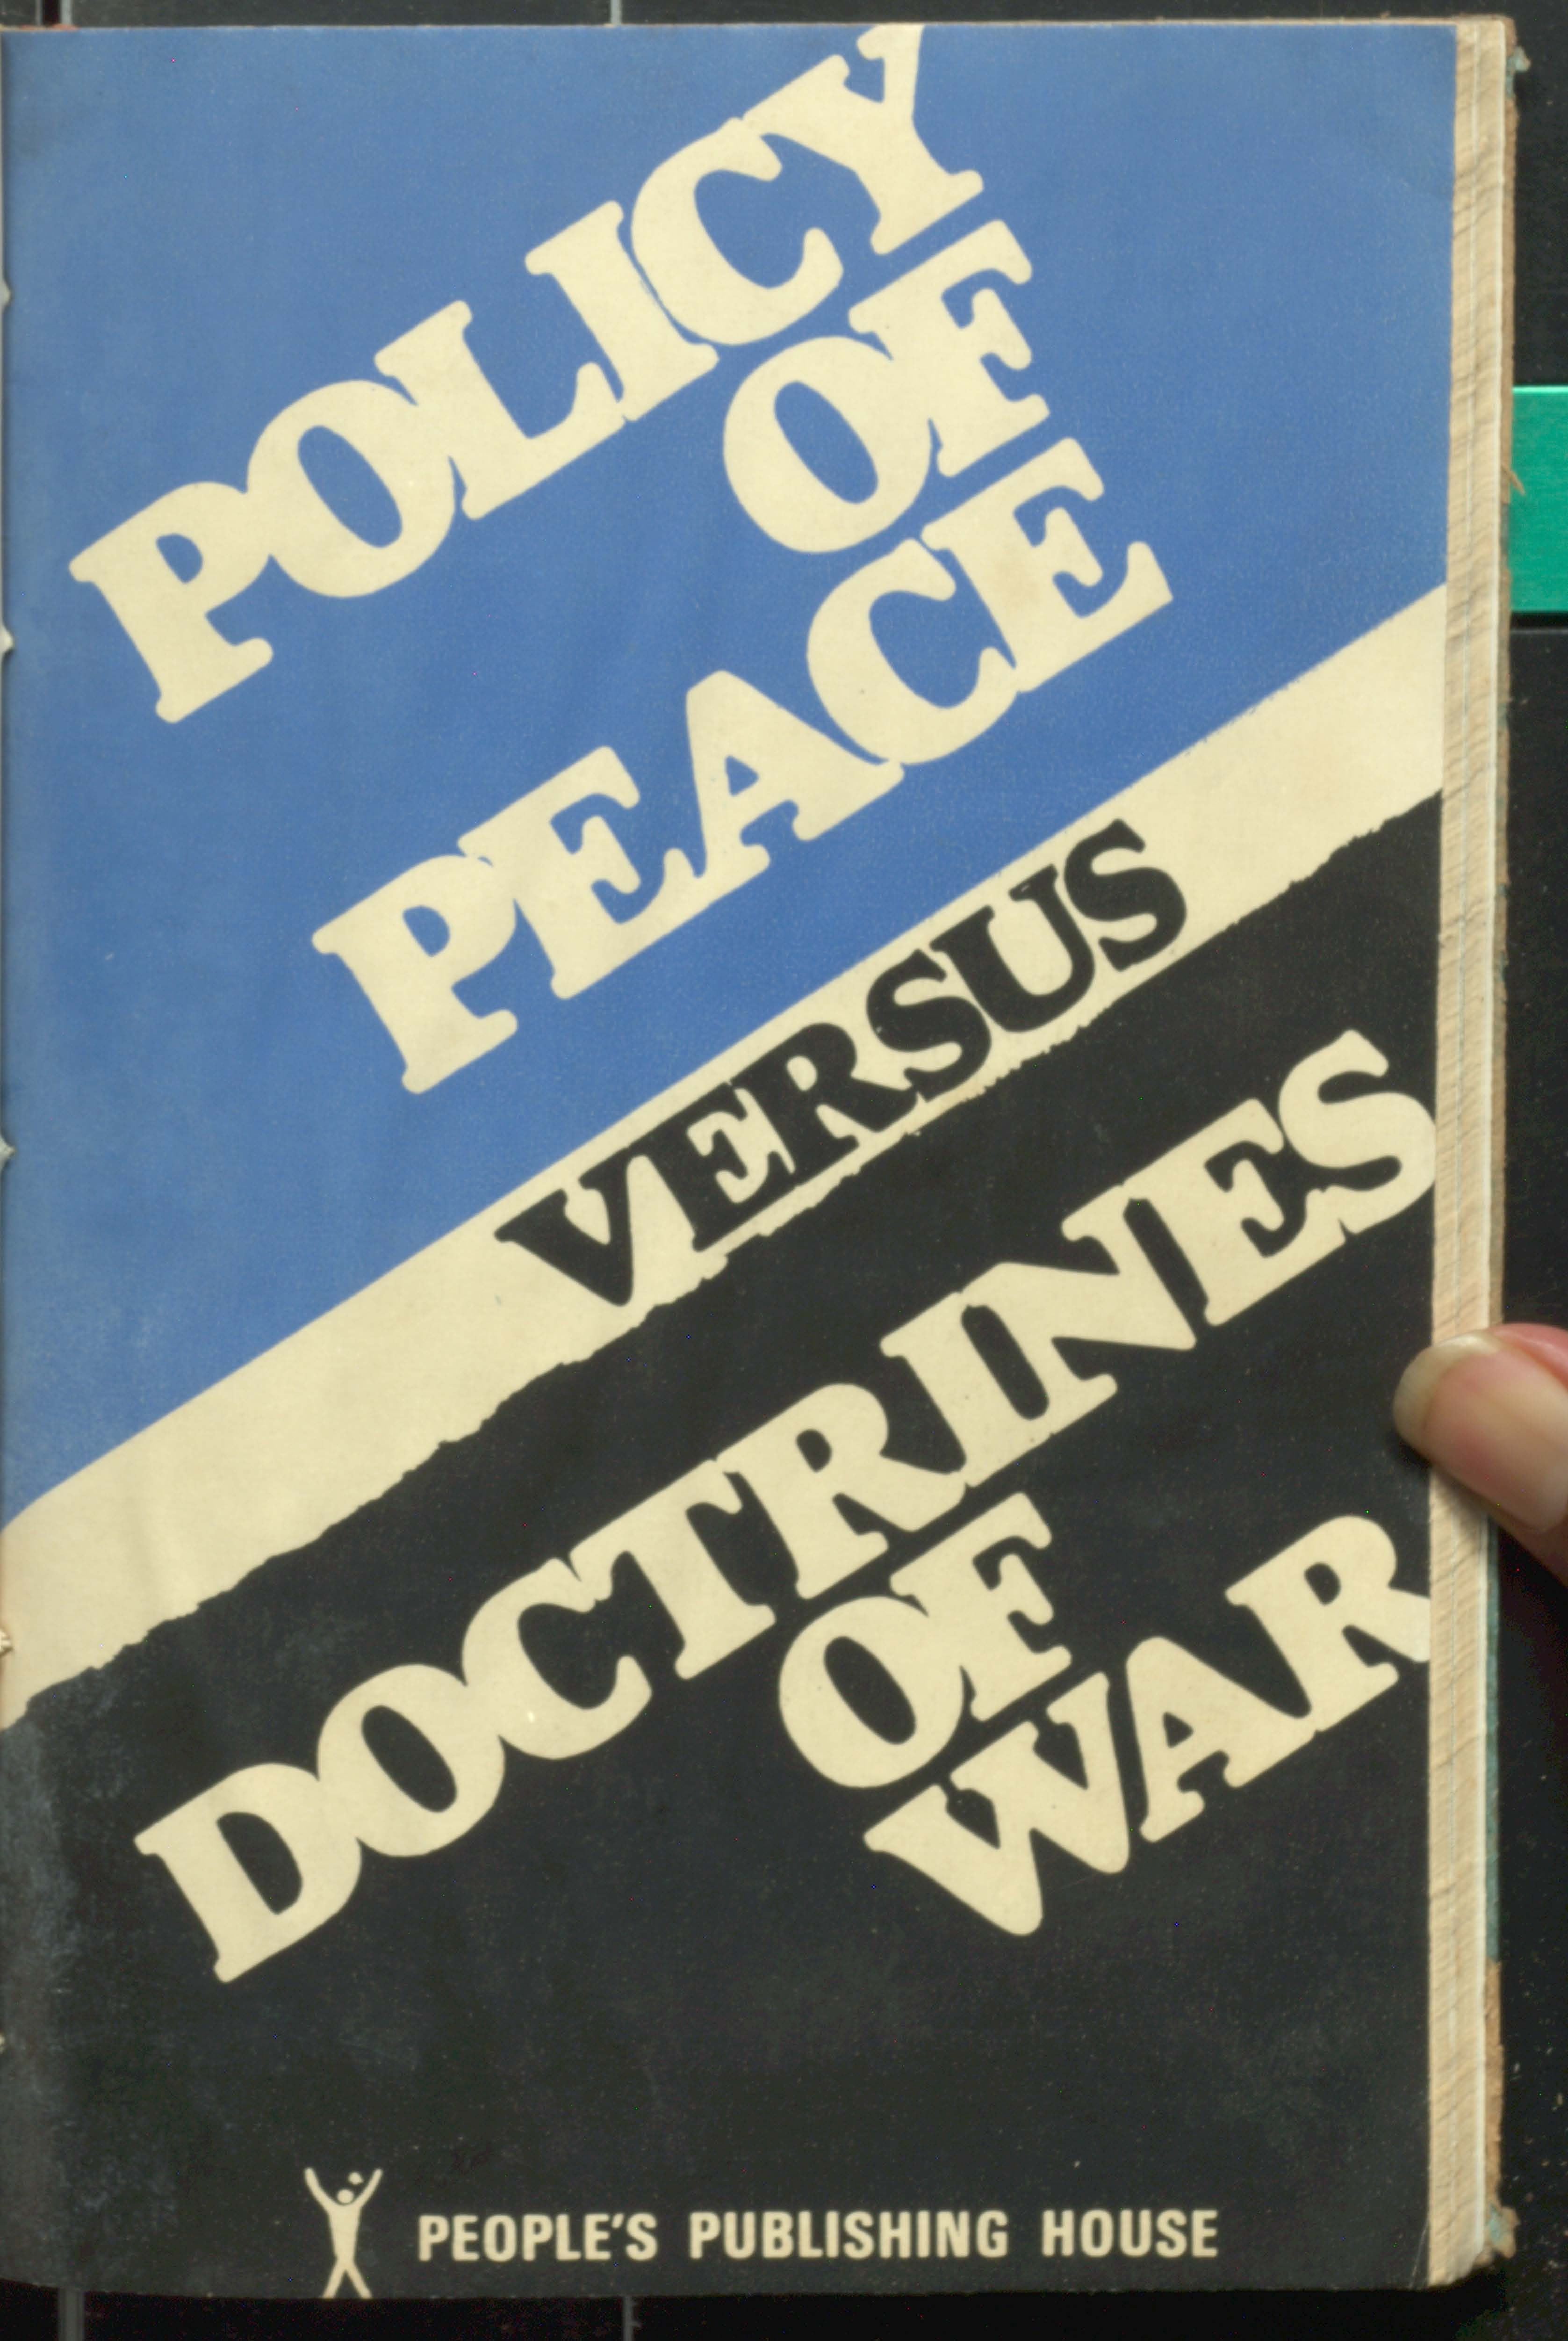 POLICY OF PEACE VERSUS DOCTRINES OF WAR